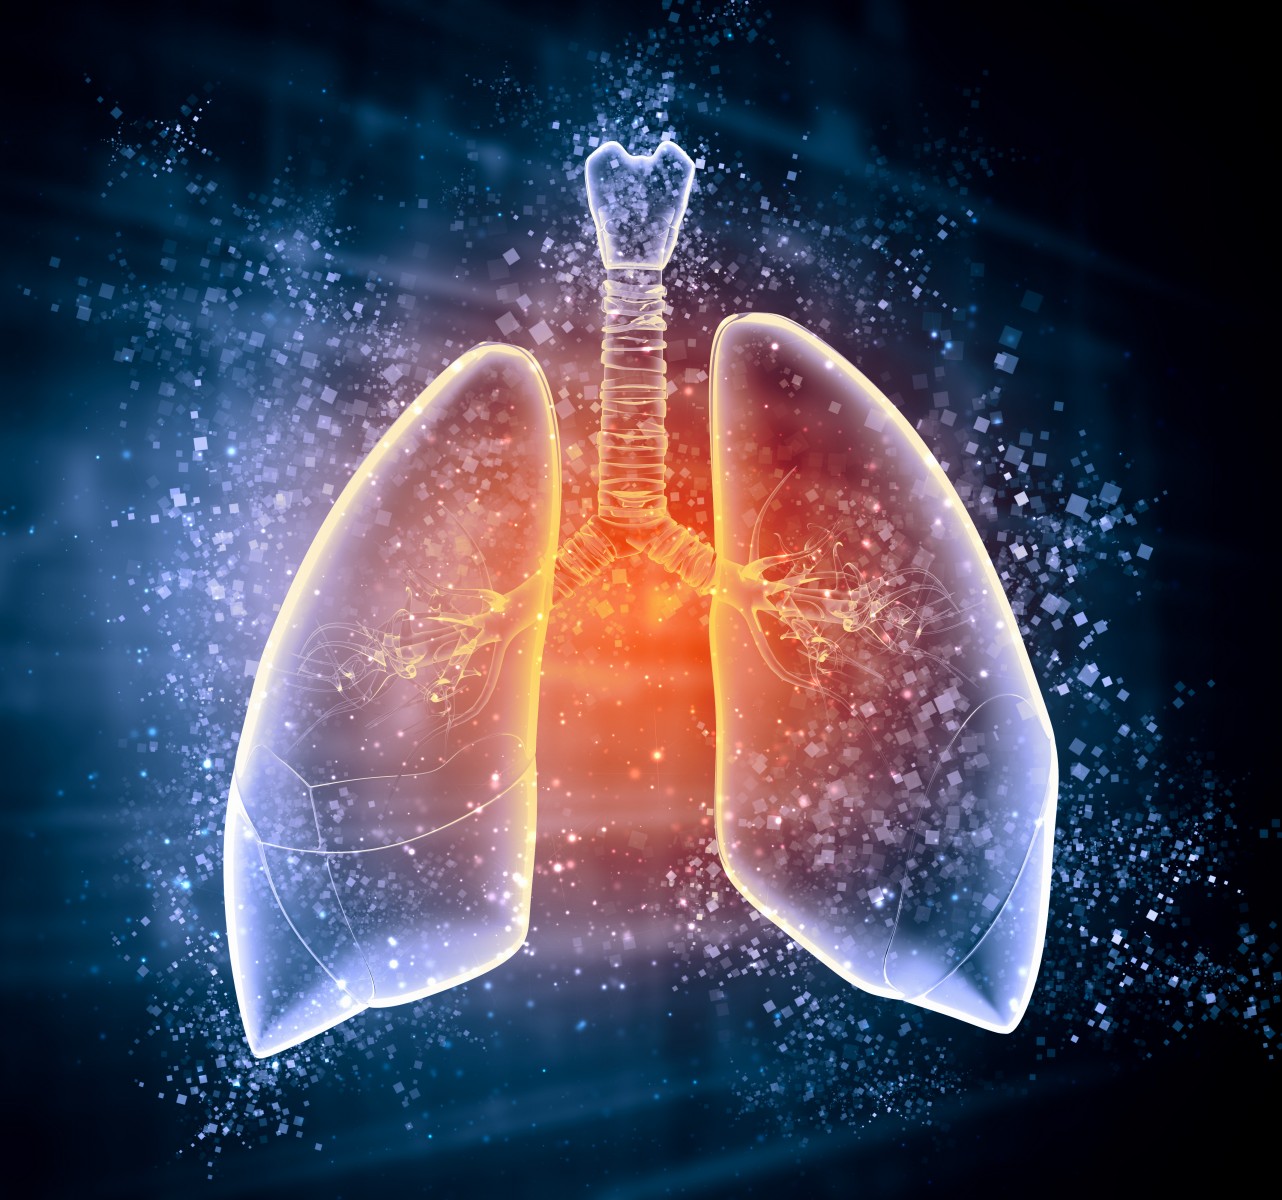 UK Researchers Create Stem CellBased “MiniLungs” for Lung Diseases